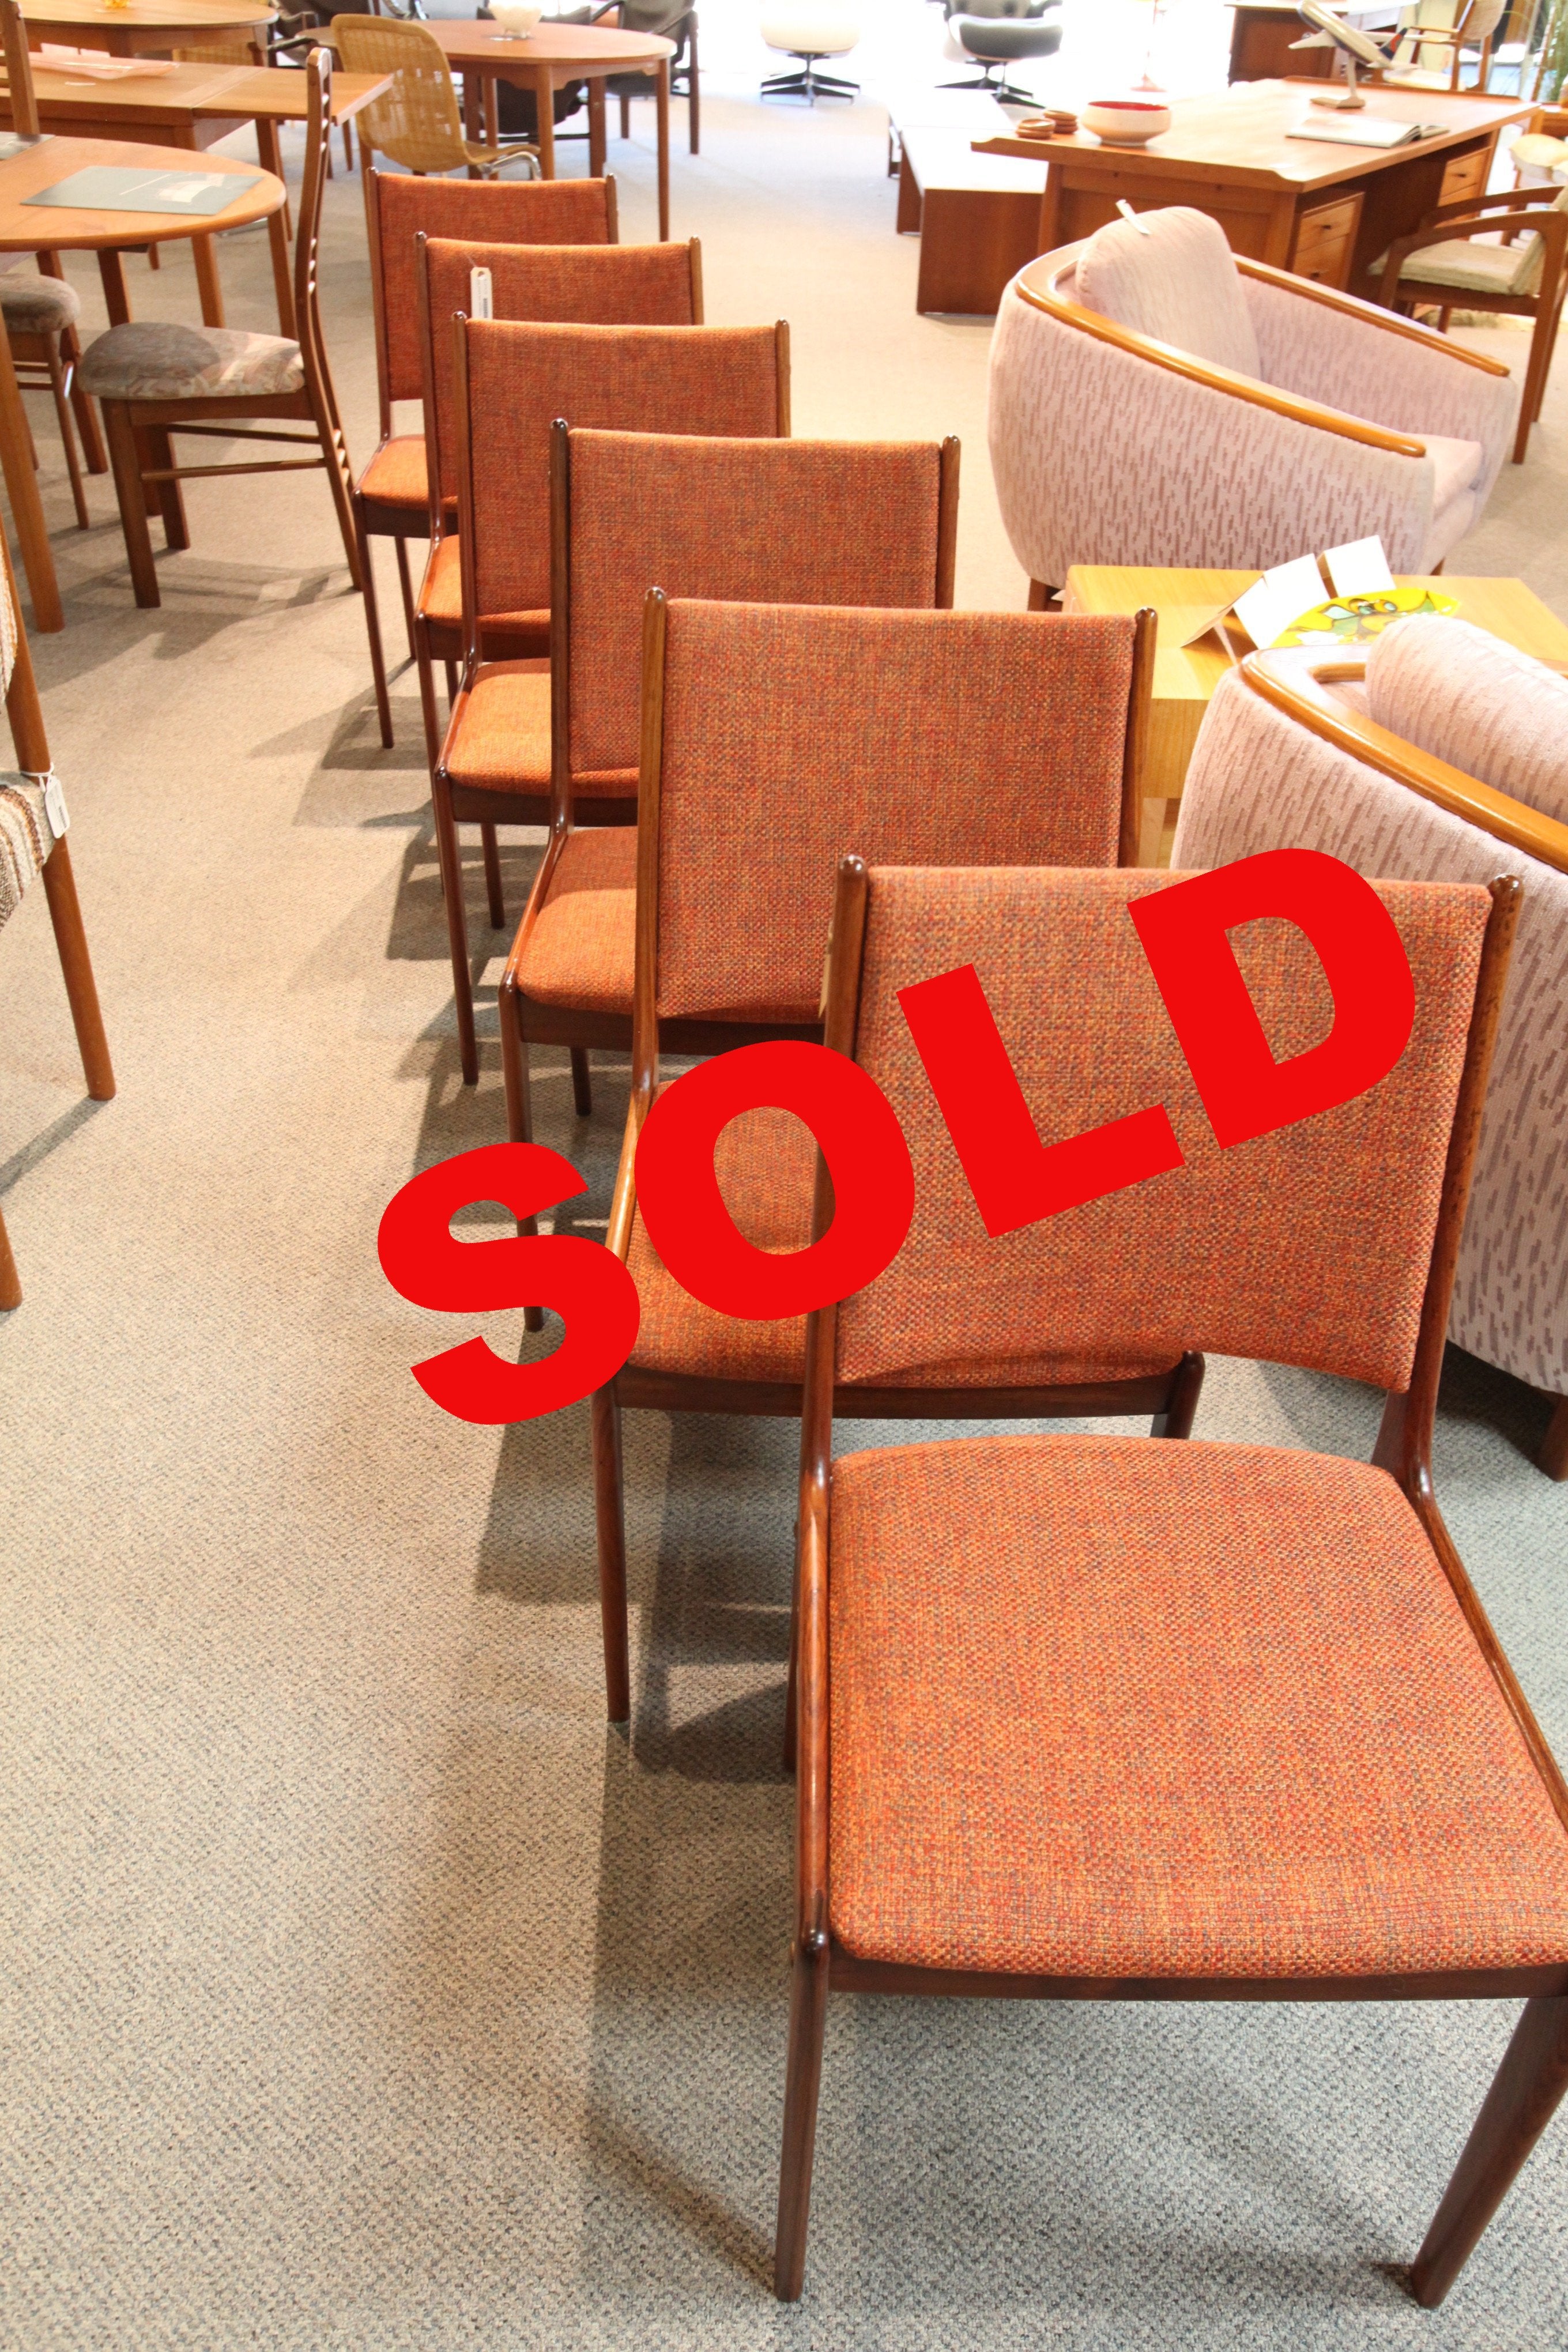 Set of 6 Teak Chairs (new upholstery)